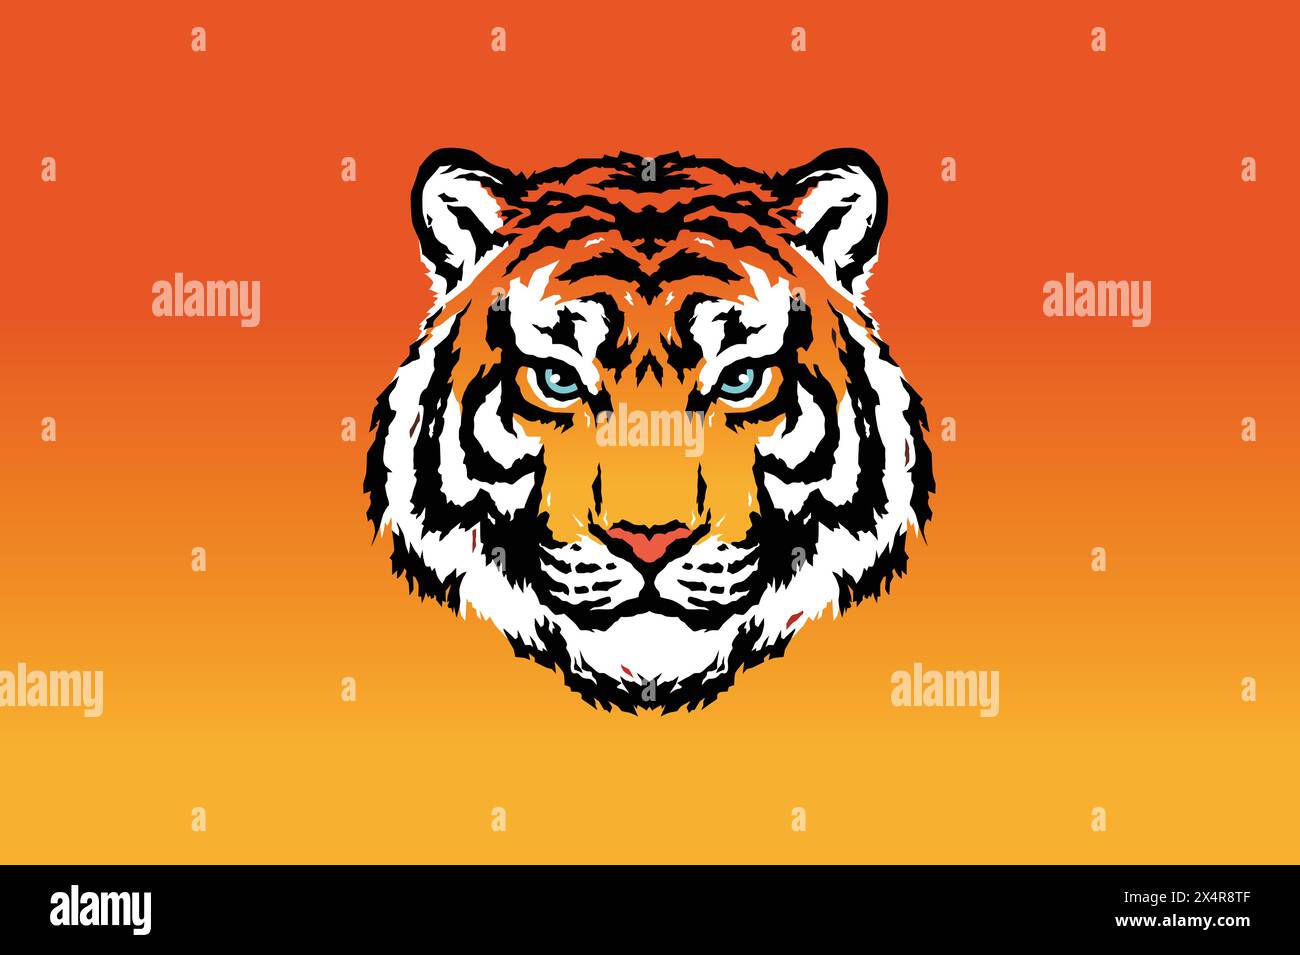 Illustration of Serious Tiger Head Stock Vector